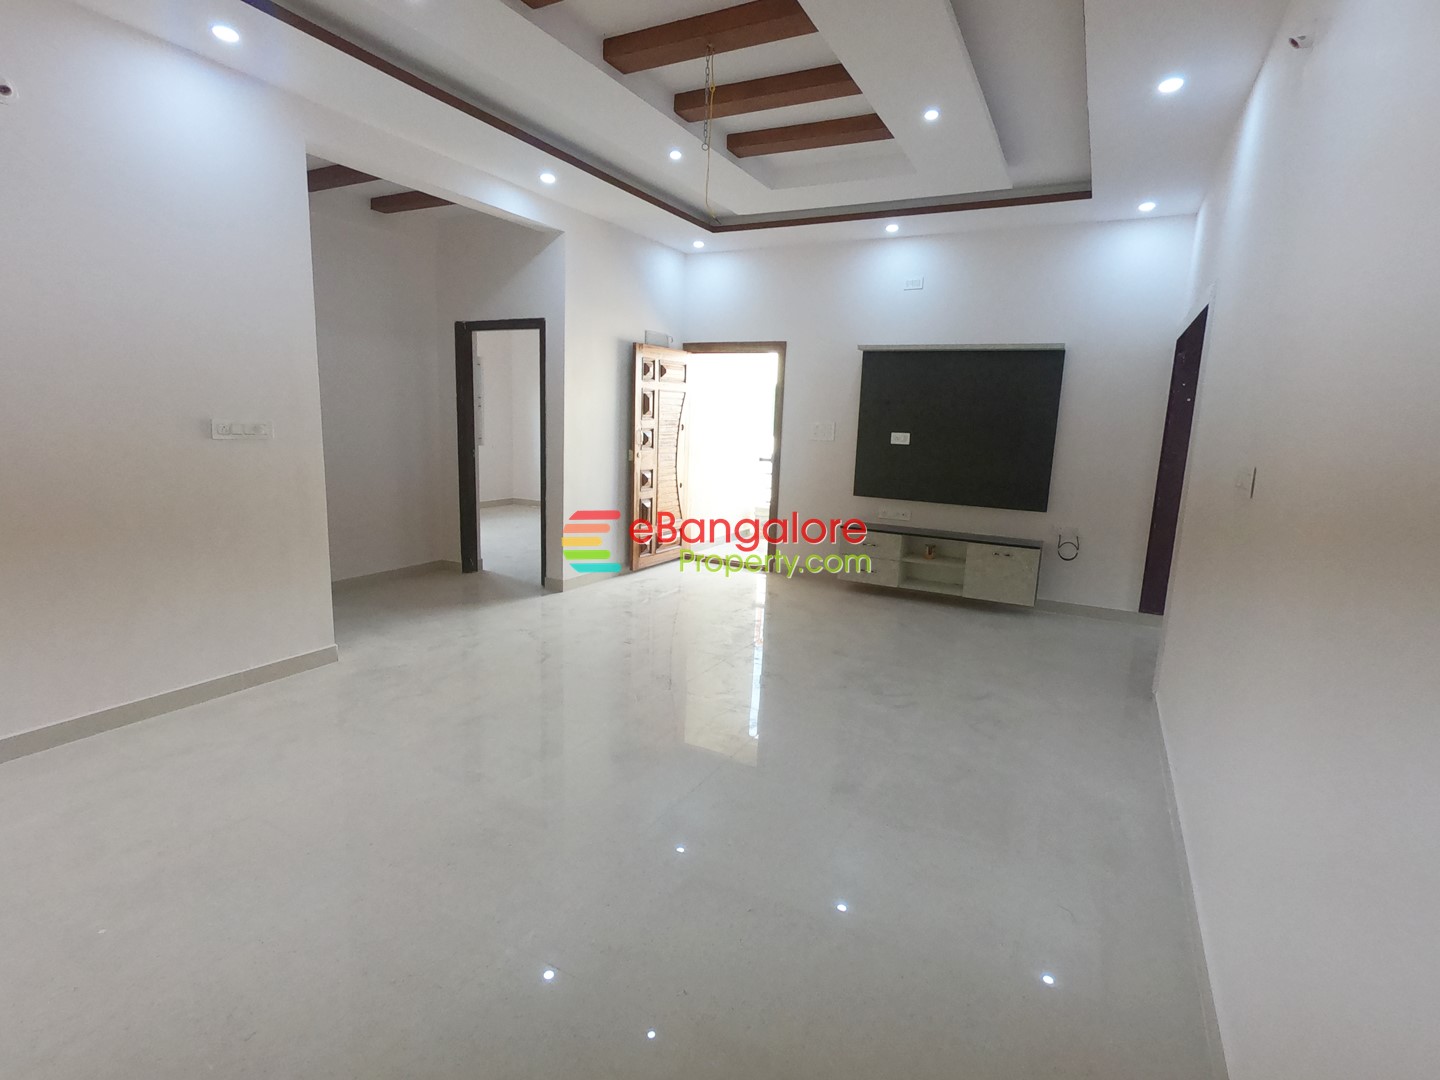 Thanisandra Road – 3 Unit Property with 3BHKs For Sale on 30×42 – Semifurnished